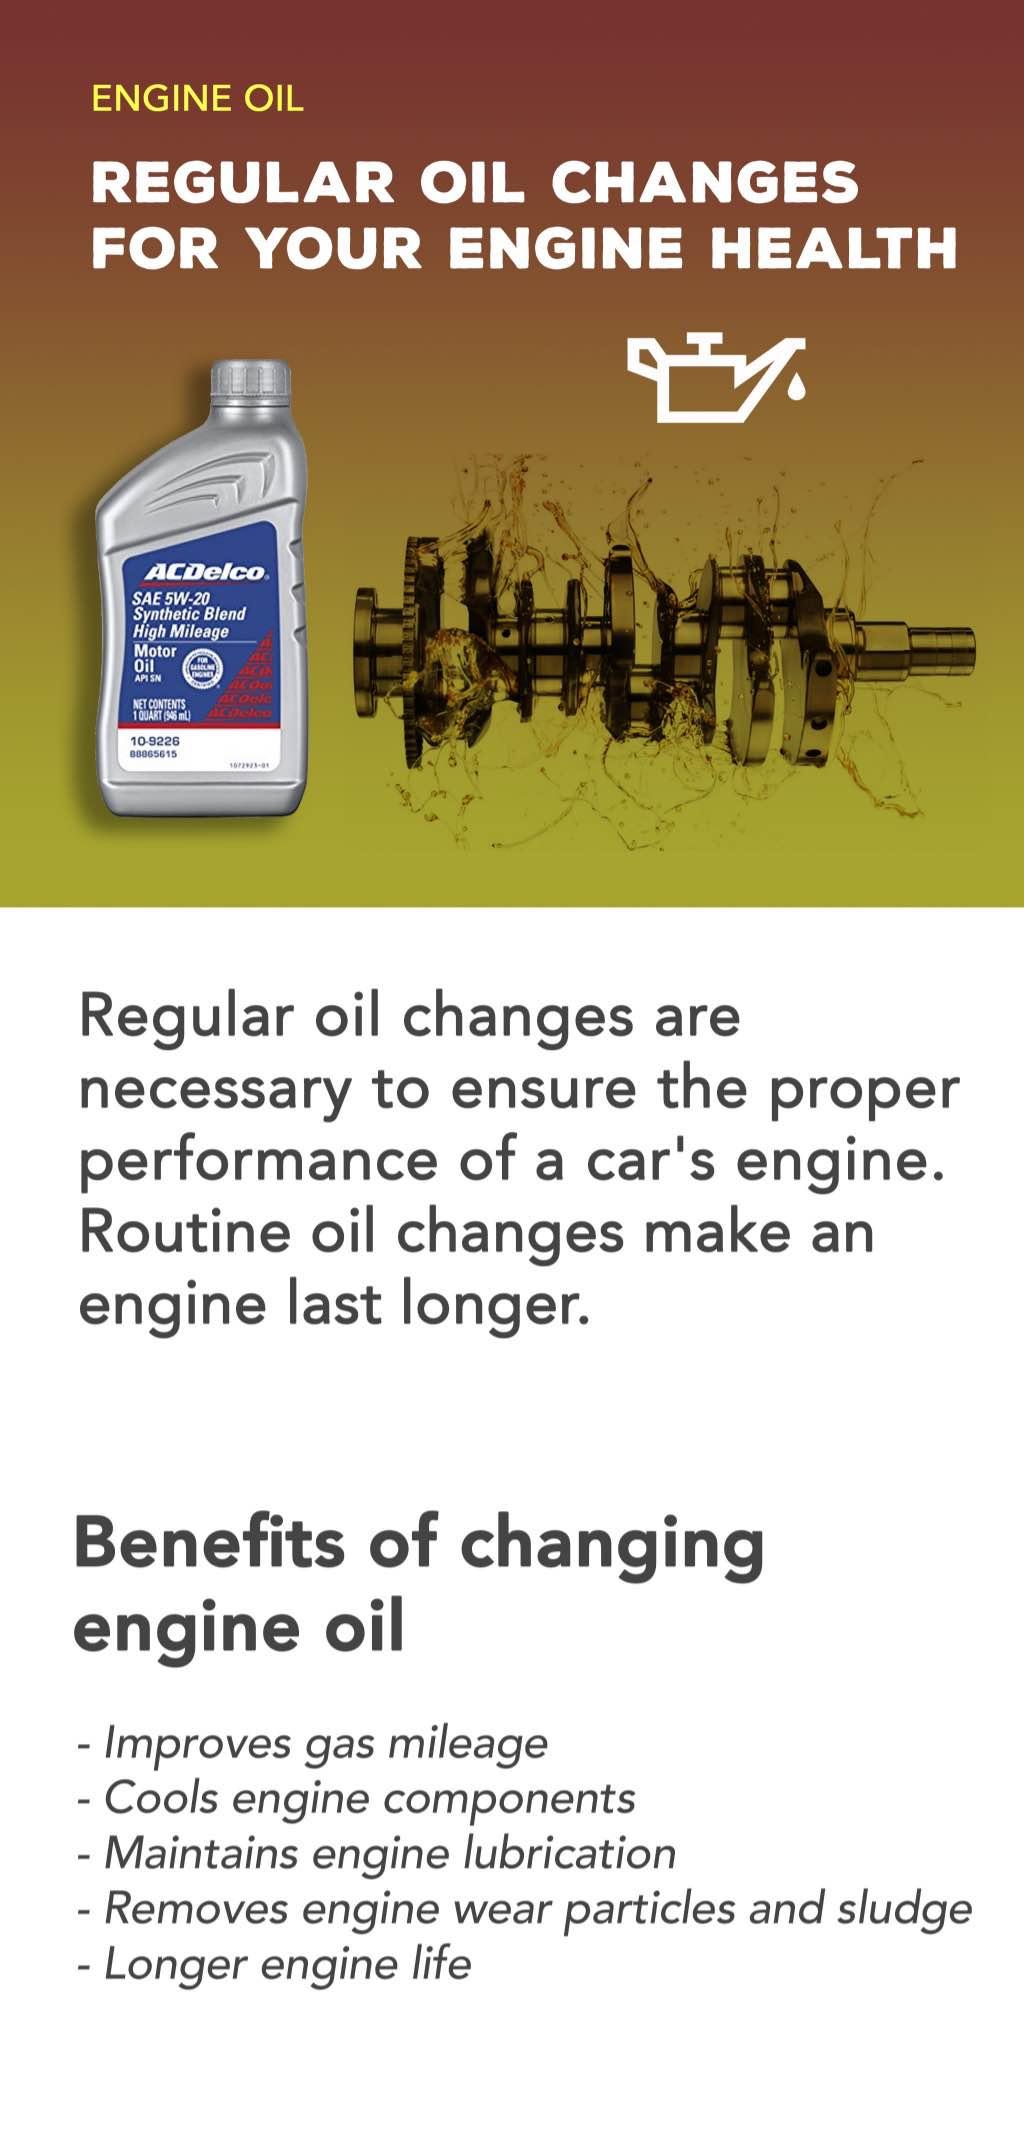 Regular oil changes are necessary to ensure the proper performance of a car's engine. Routine oil changes make an engine last longer.